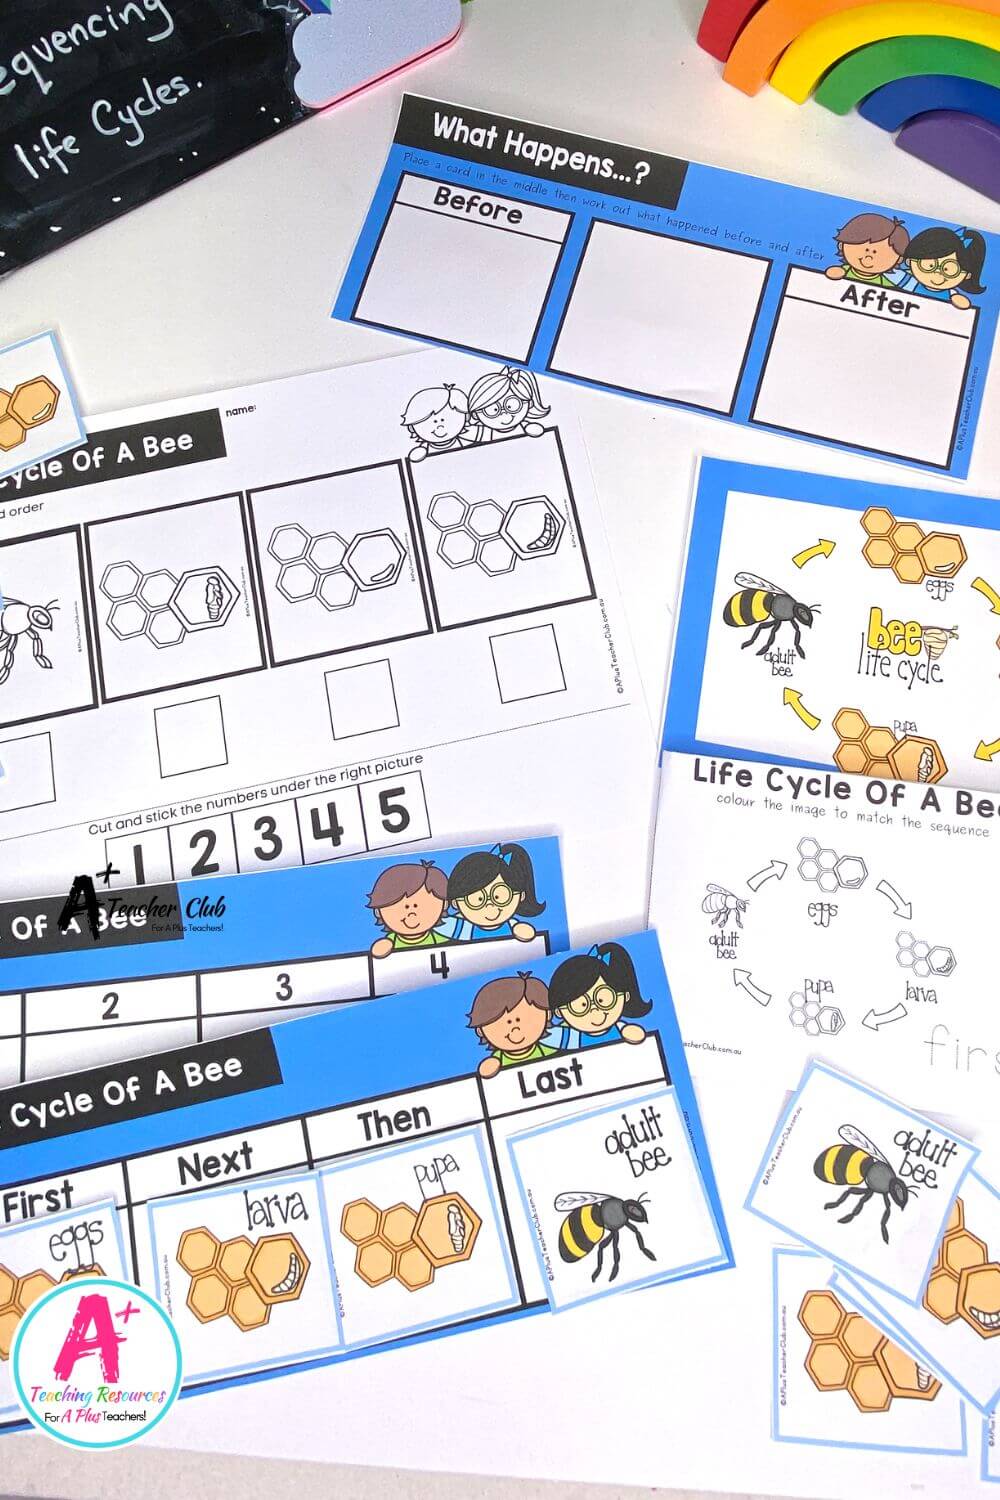 Life Cycle Sequencing 4 Steps - Bee Activities Pack